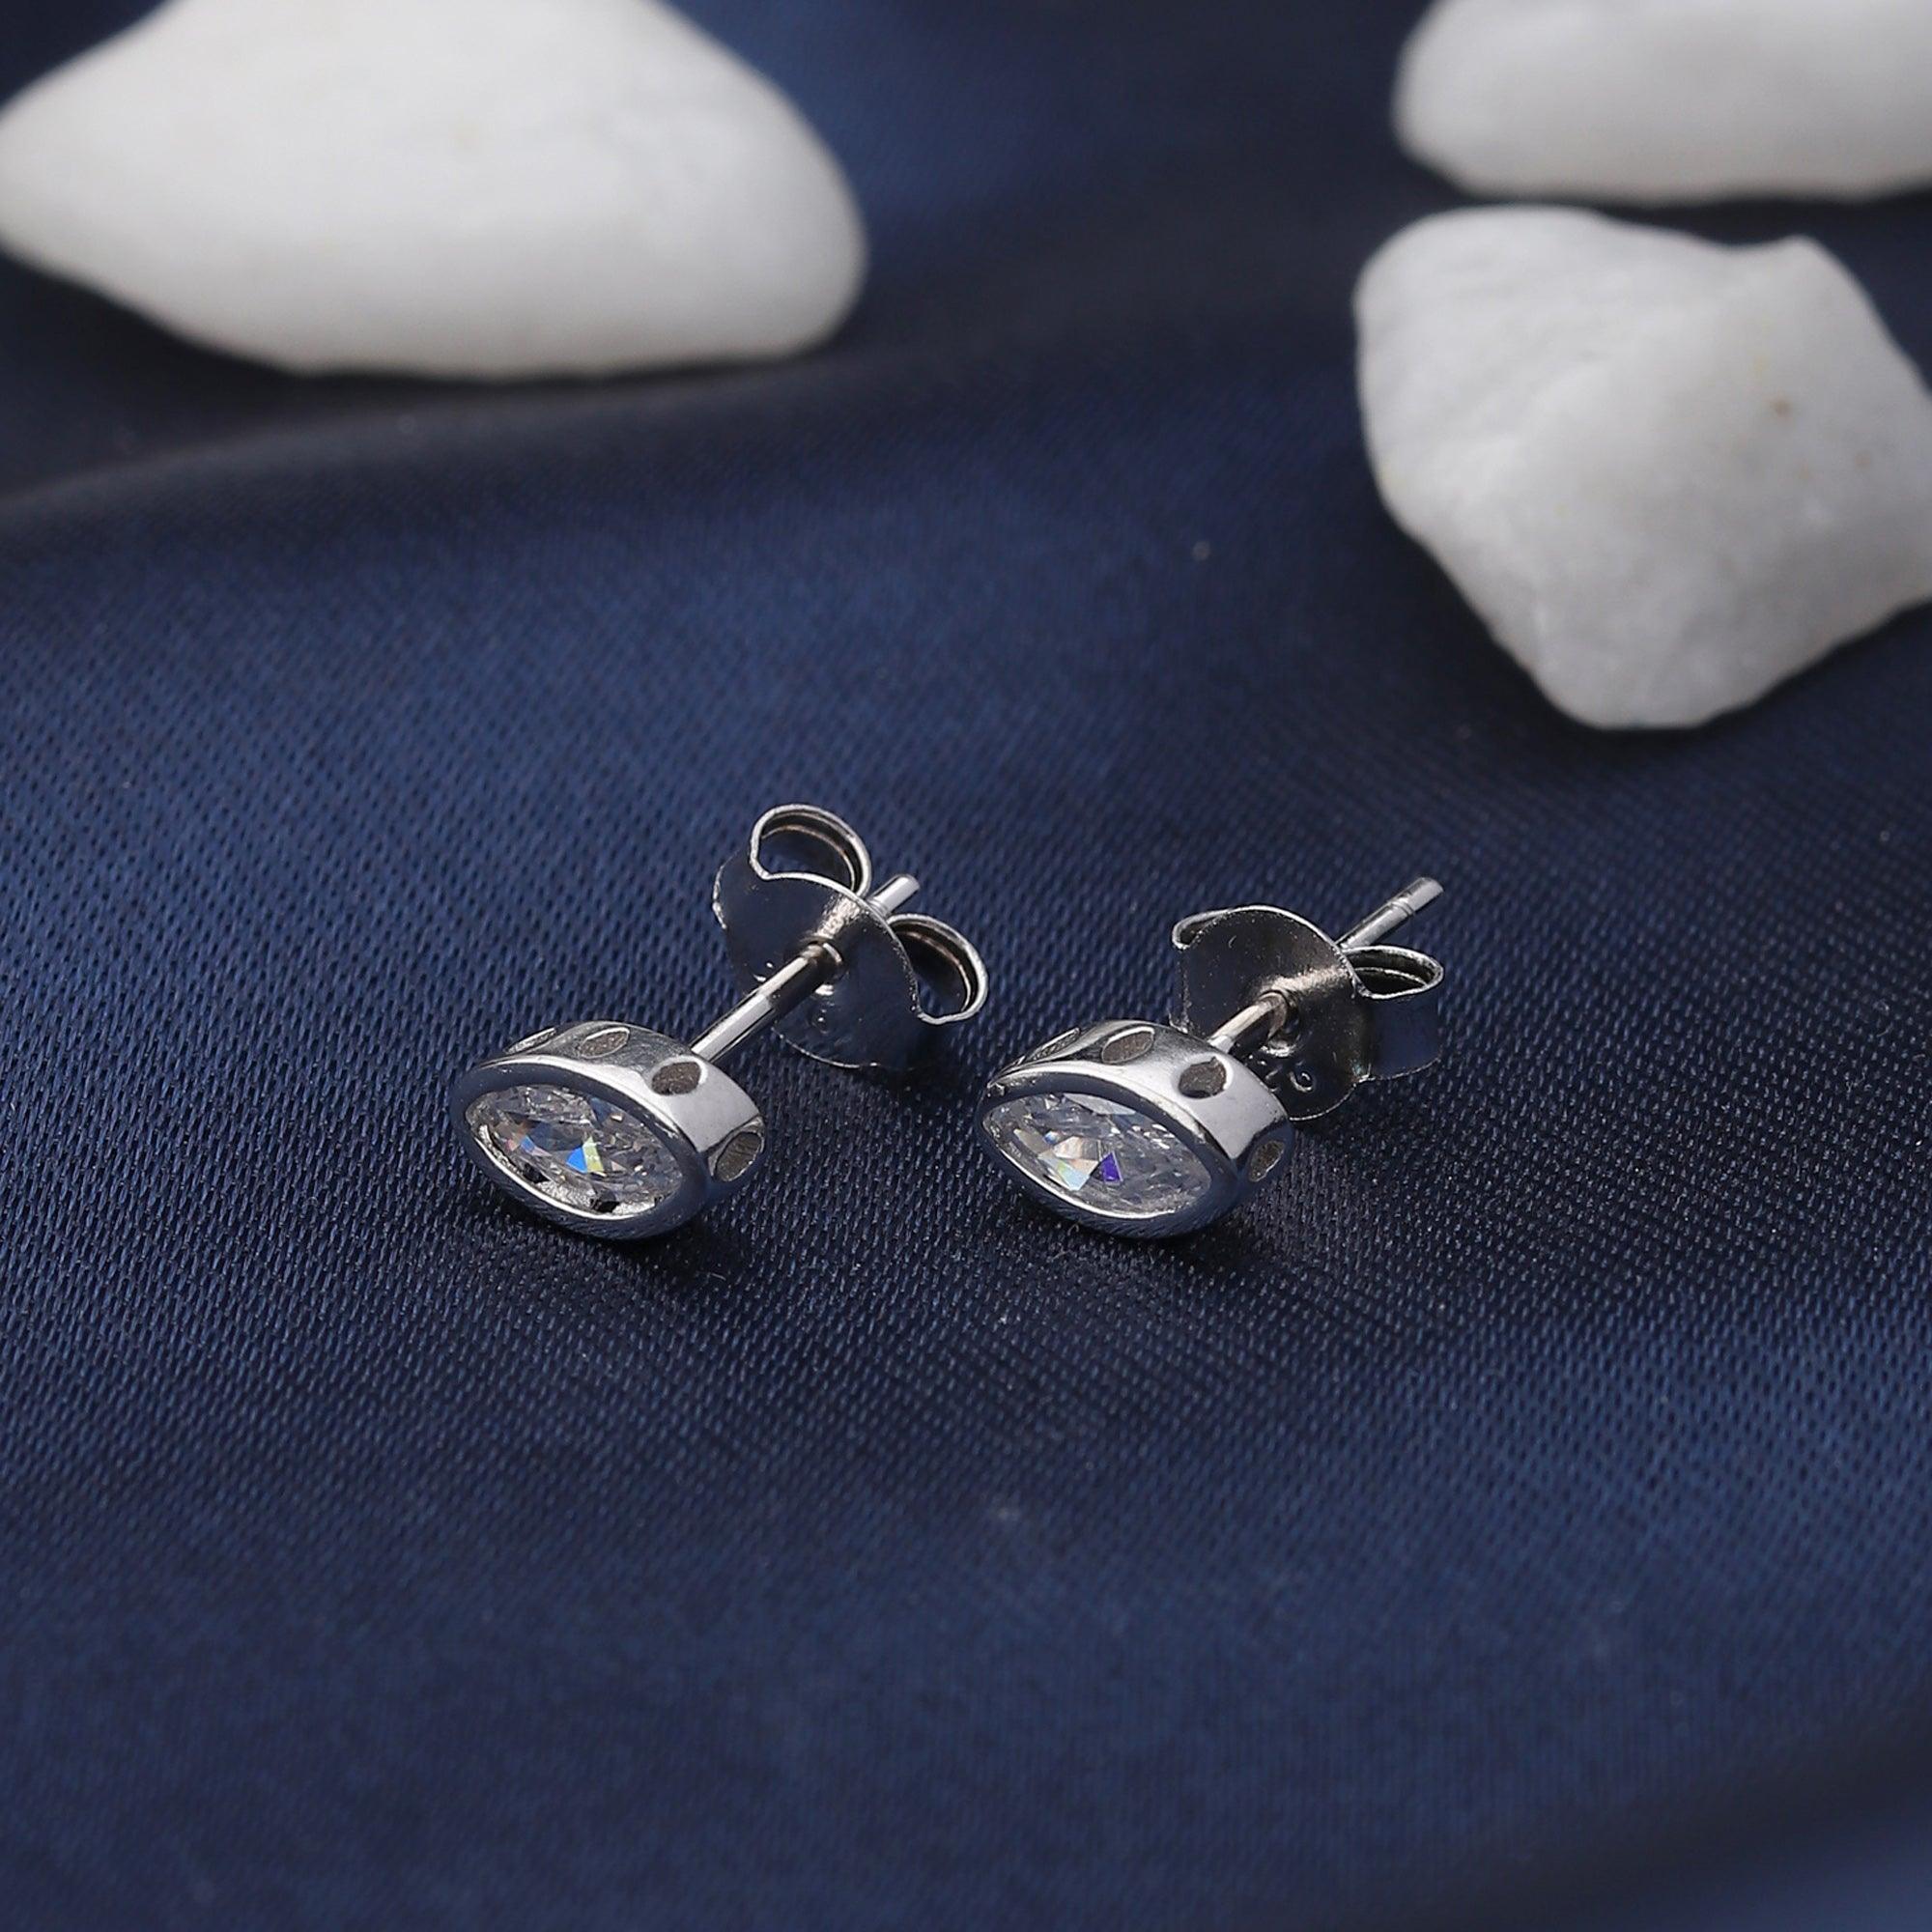 Tranquility Marker Silver Buds - silvermark